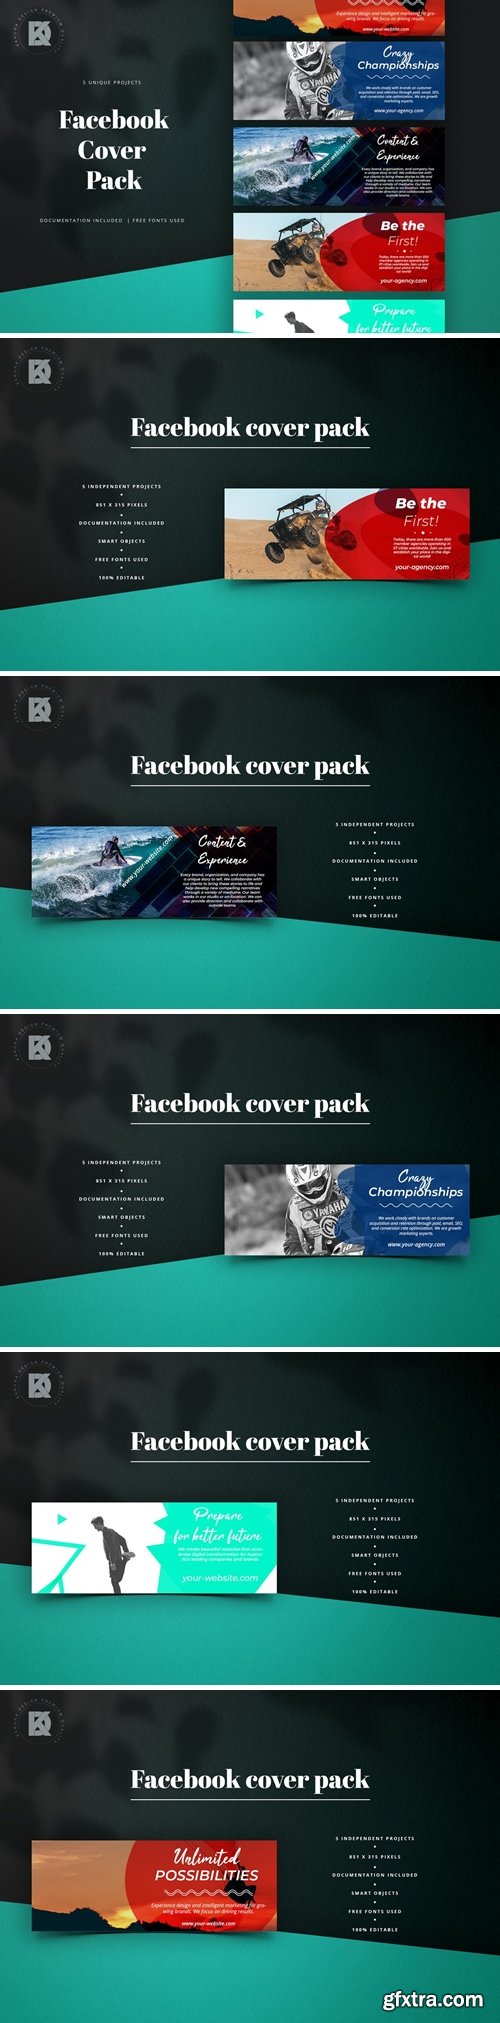 Facebook Cover Pack